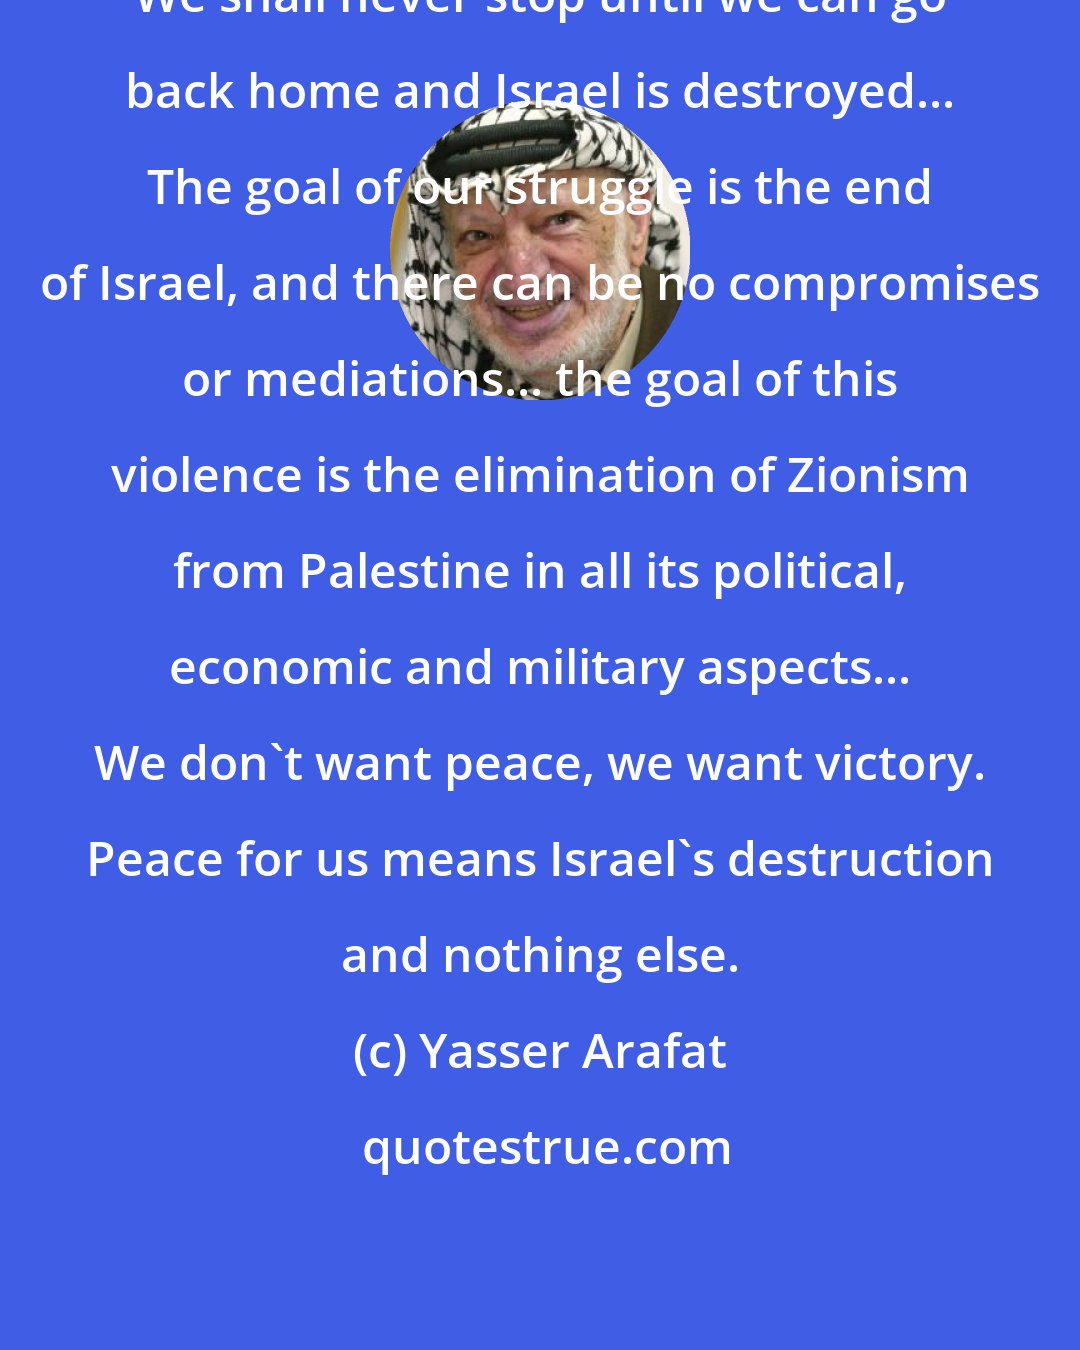 Yasser Arafat: We shall never stop until we can go back home and Israel is destroyed... The goal of our struggle is the end of Israel, and there can be no compromises or mediations... the goal of this violence is the elimination of Zionism from Palestine in all its political, economic and military aspects... We don't want peace, we want victory. Peace for us means Israel's destruction and nothing else.